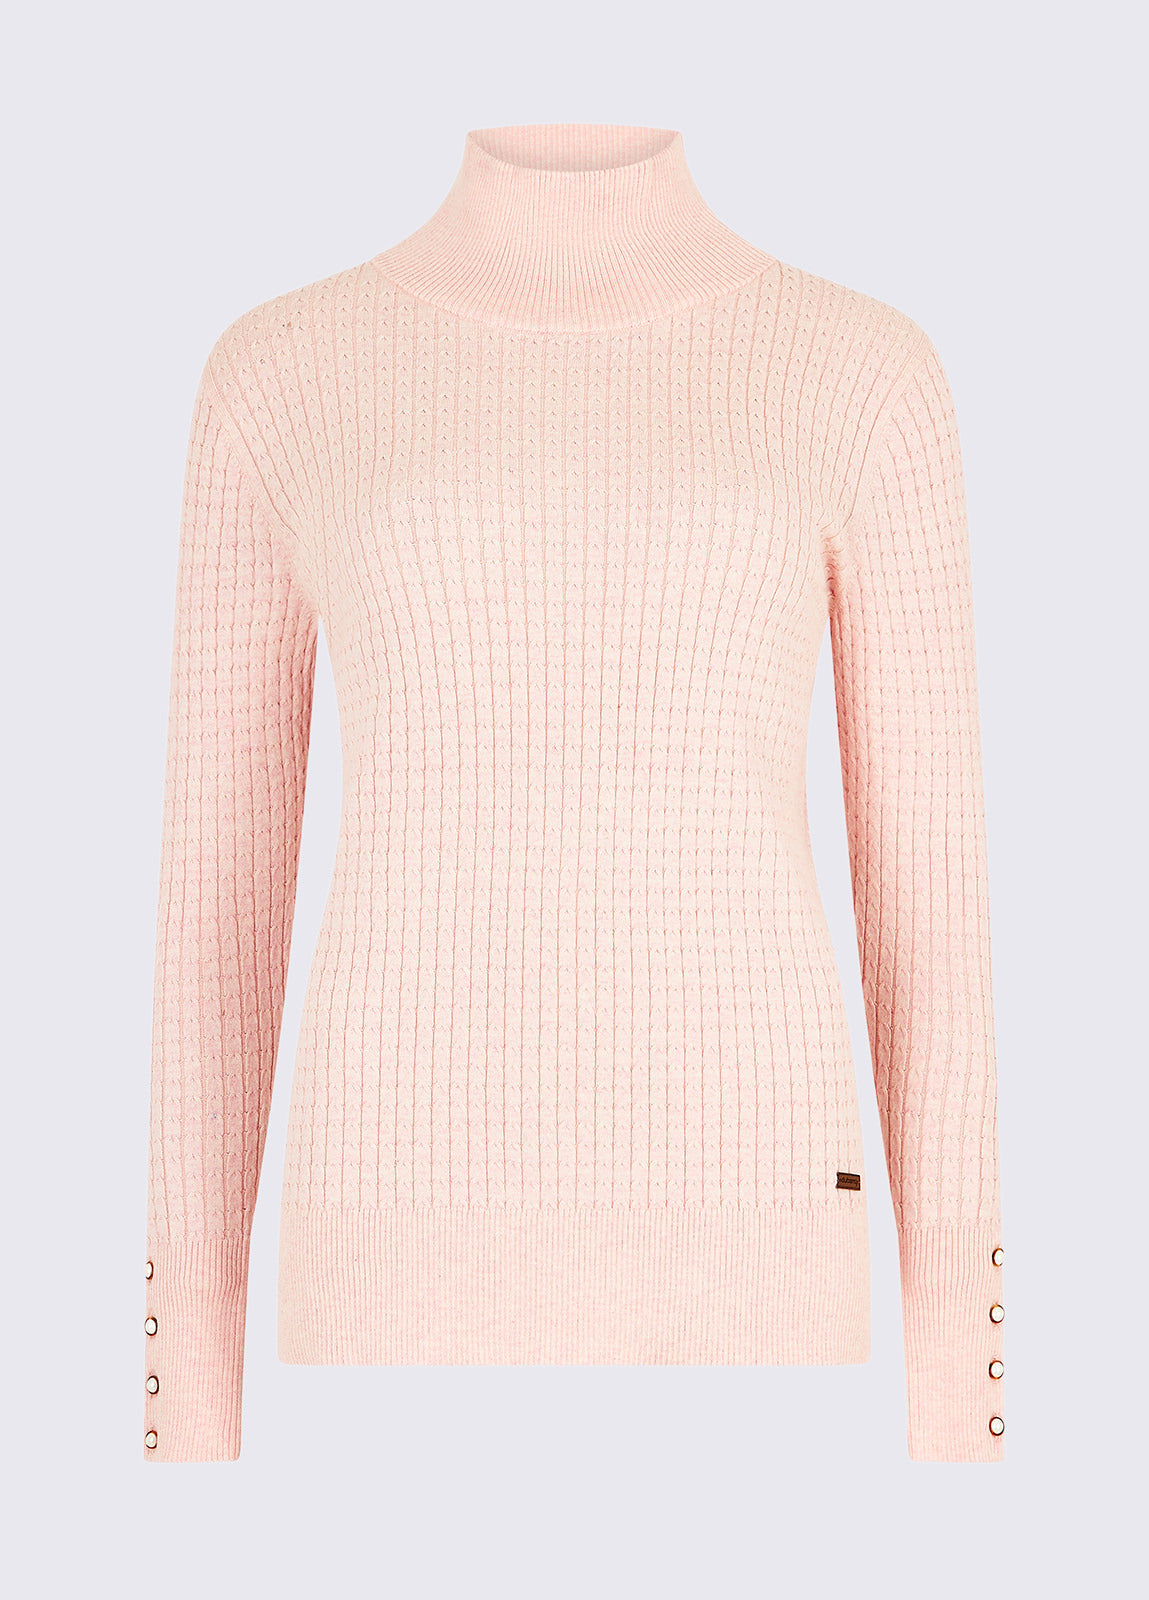 Brennan Sweater - OUTLET